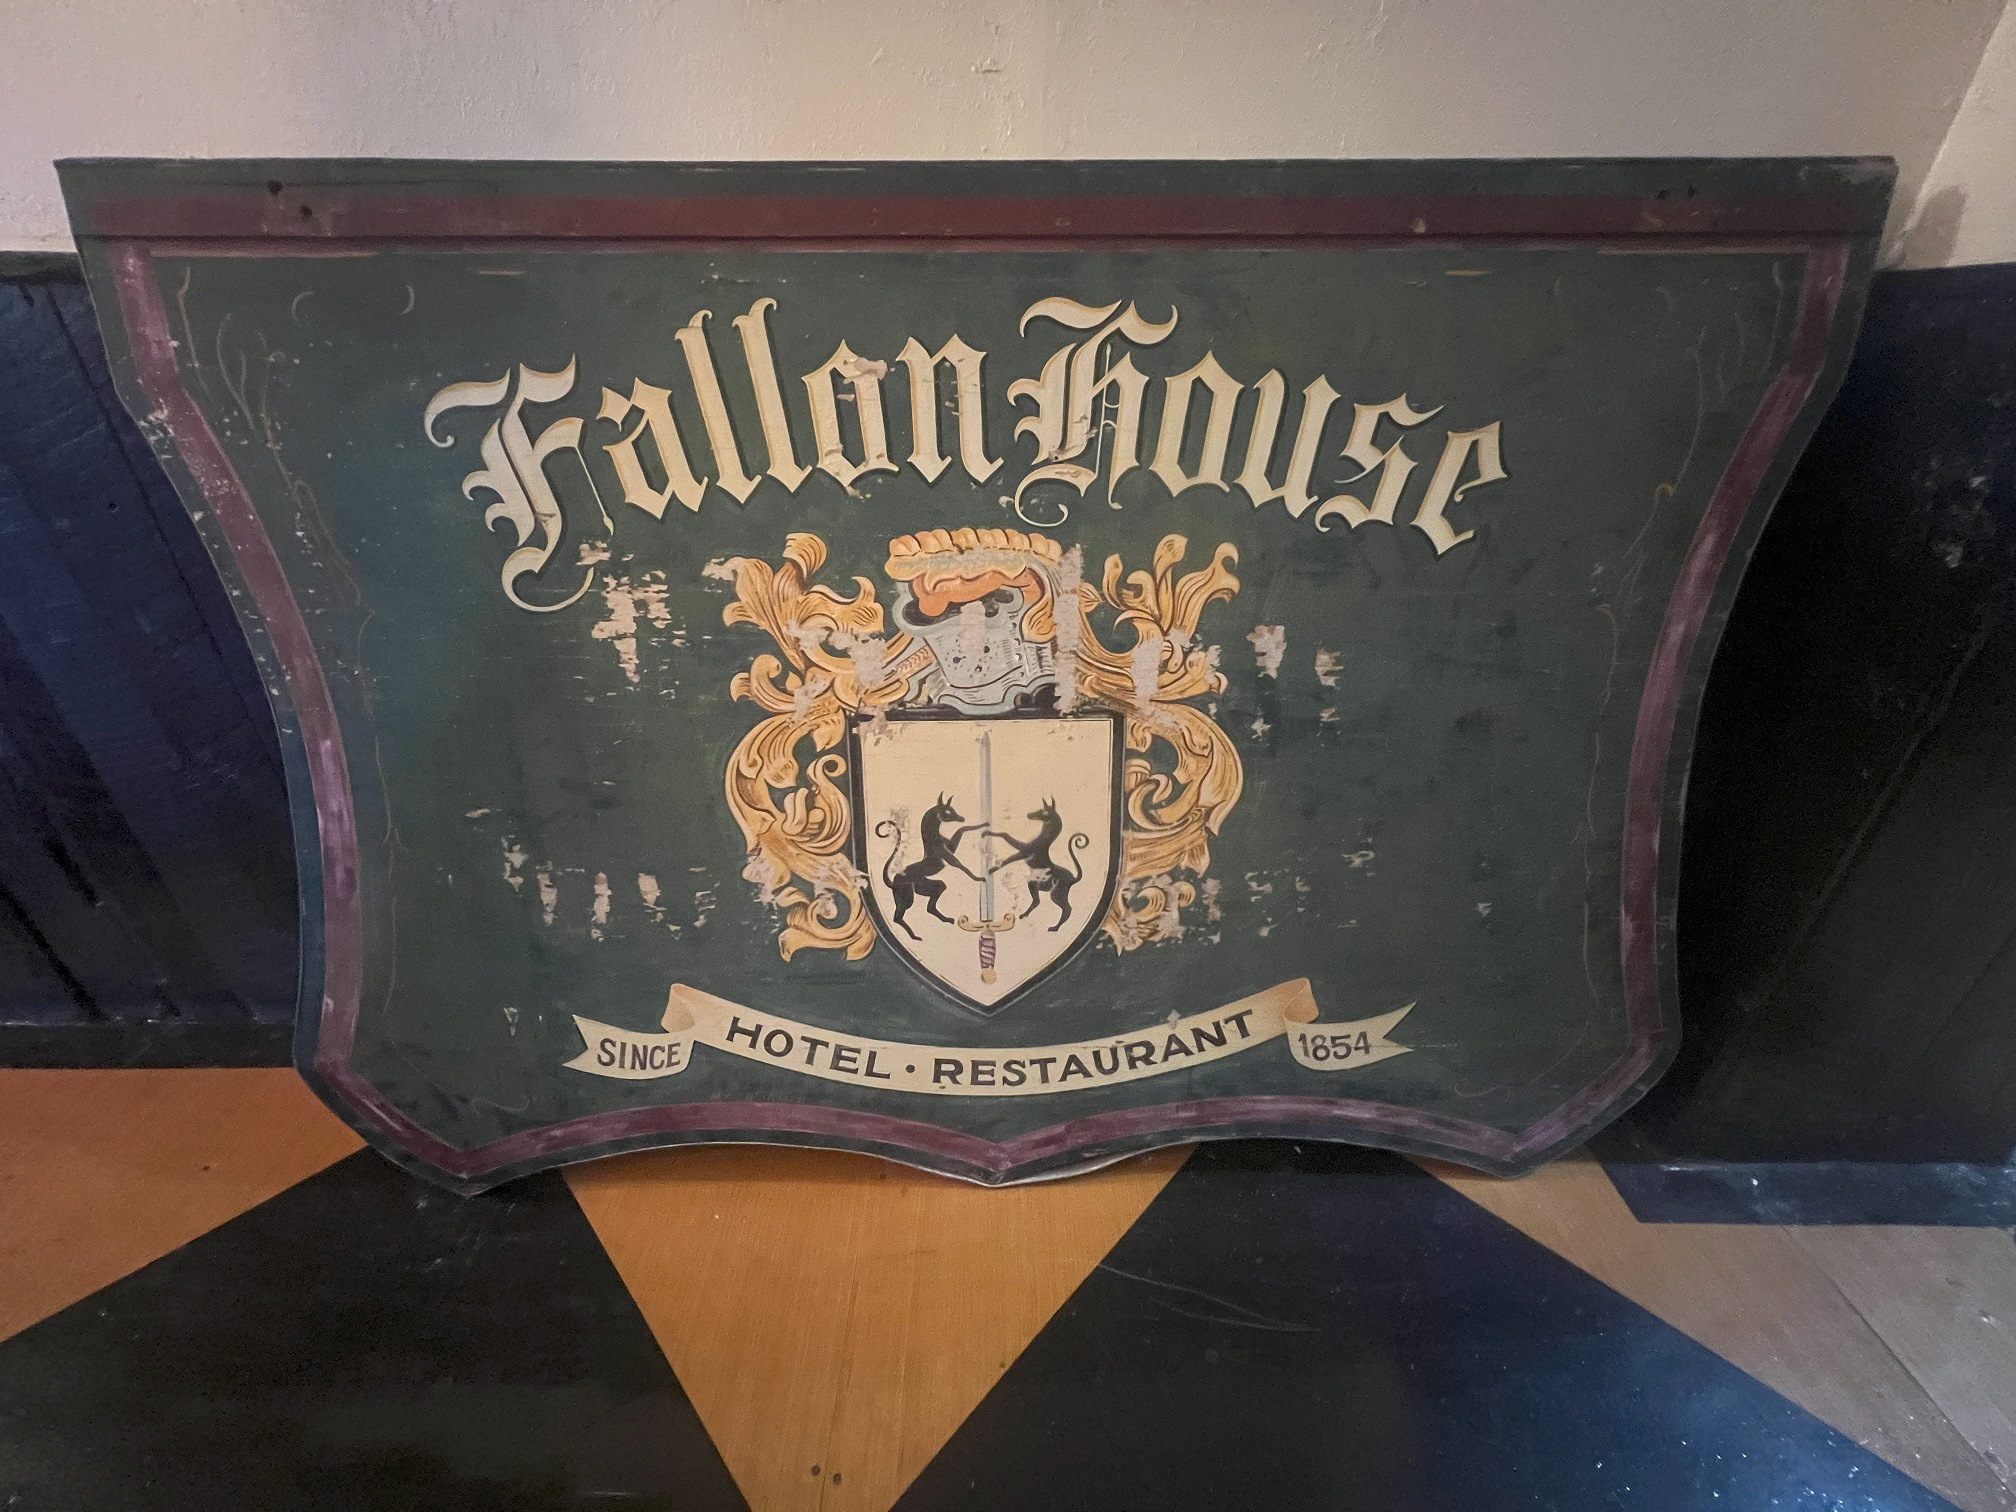 Wooden sign with words "Fallon House" above a decorative coat of arms. The words "Hotel Restaurant Since 1854" at the bottom.